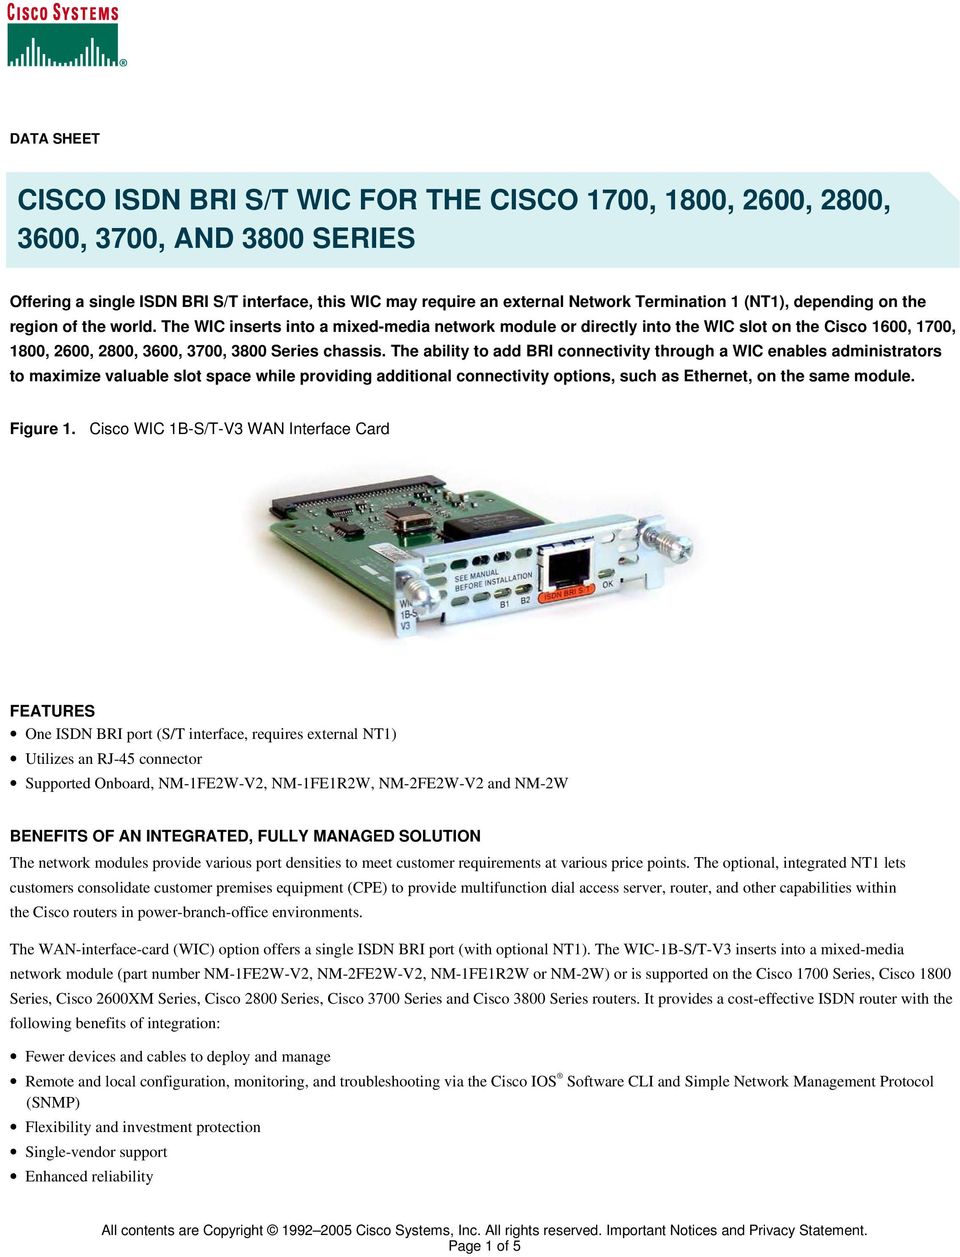 The ability to add BRI connectivity through a WIC enables administrators to maximize valuable slot space while providing additional connectivity options, such as Ethernet, on the same module.